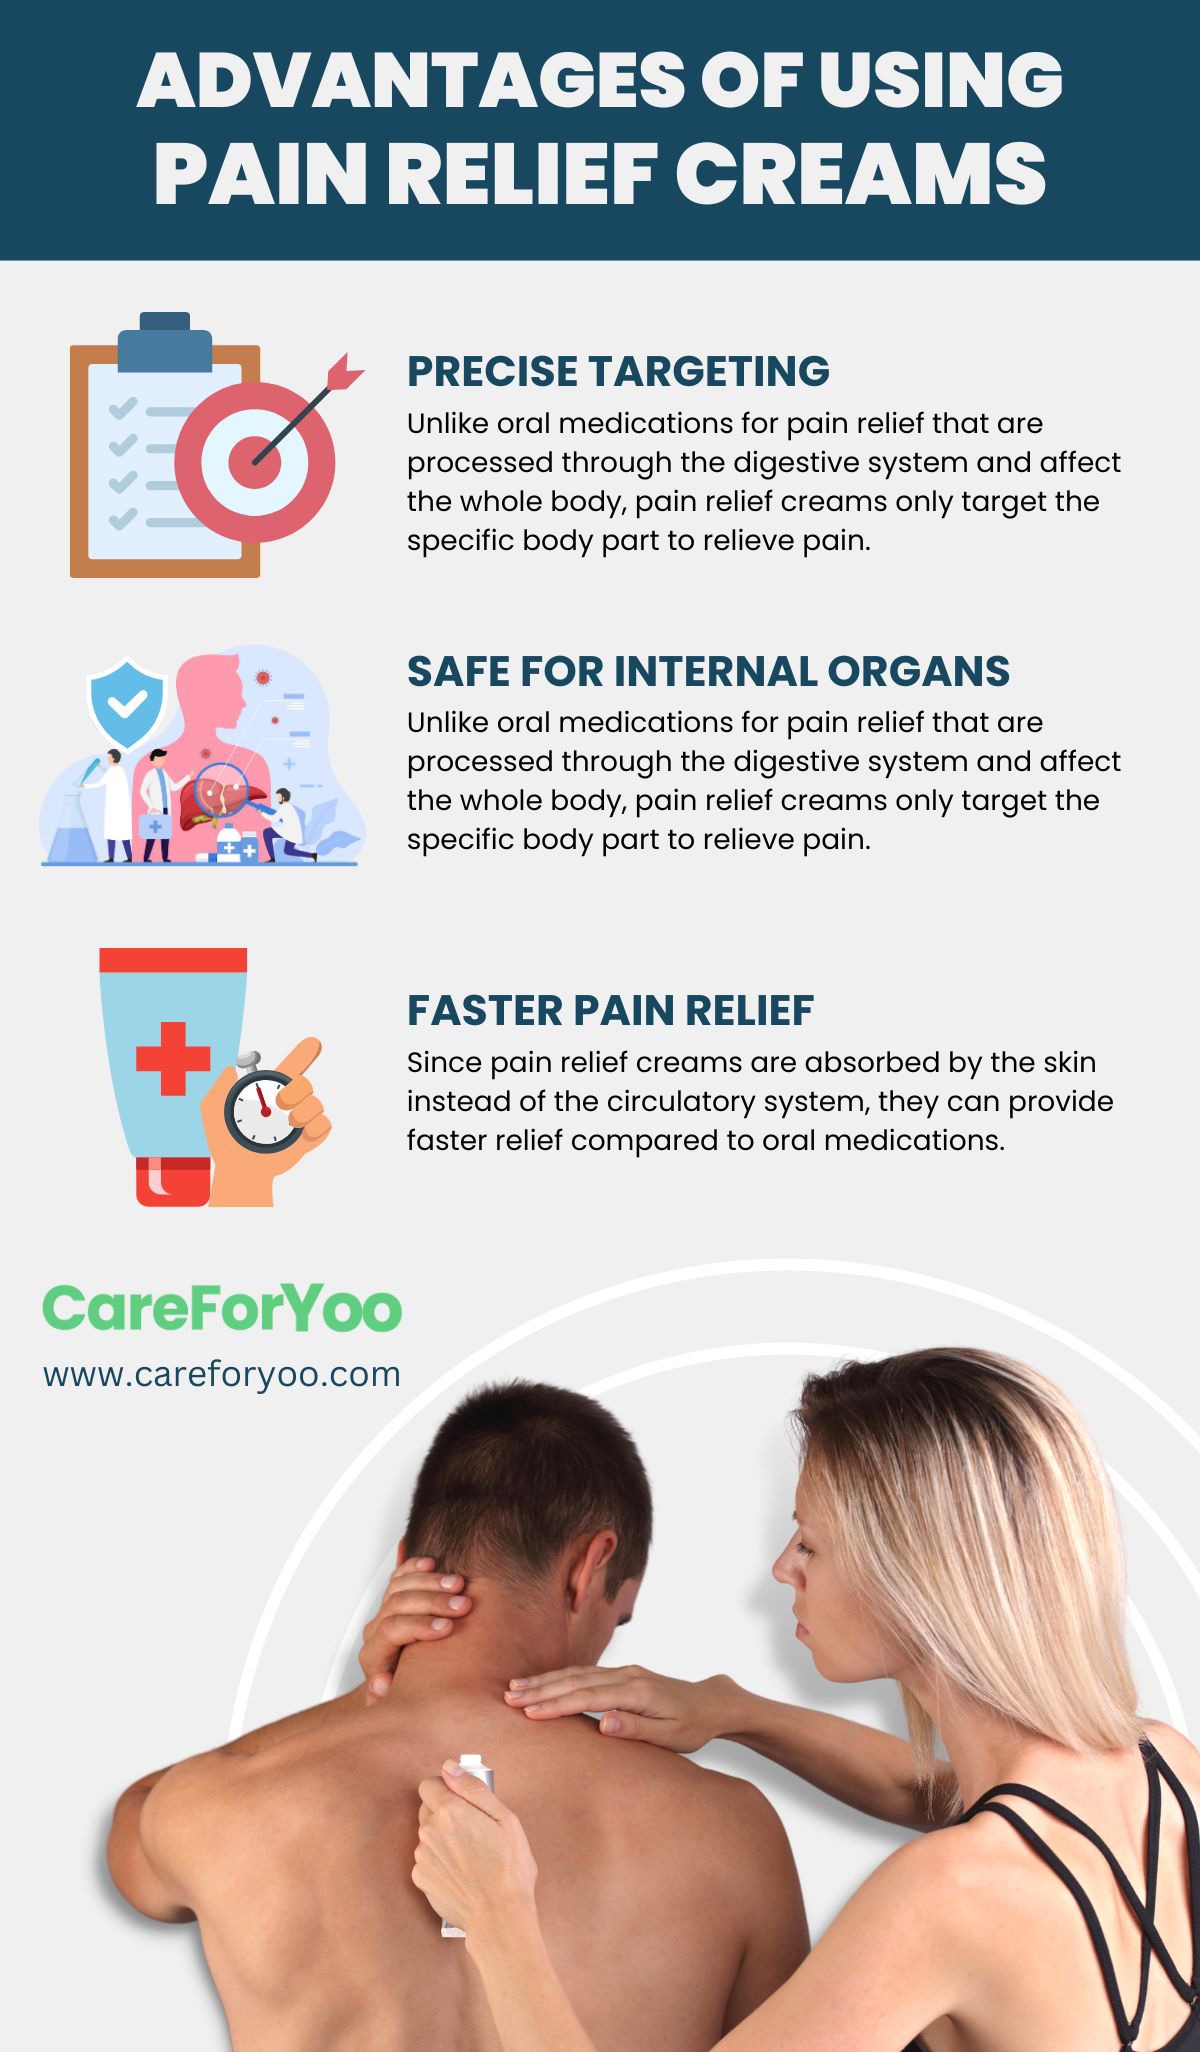 Advantages of Using Pain Relief Creams